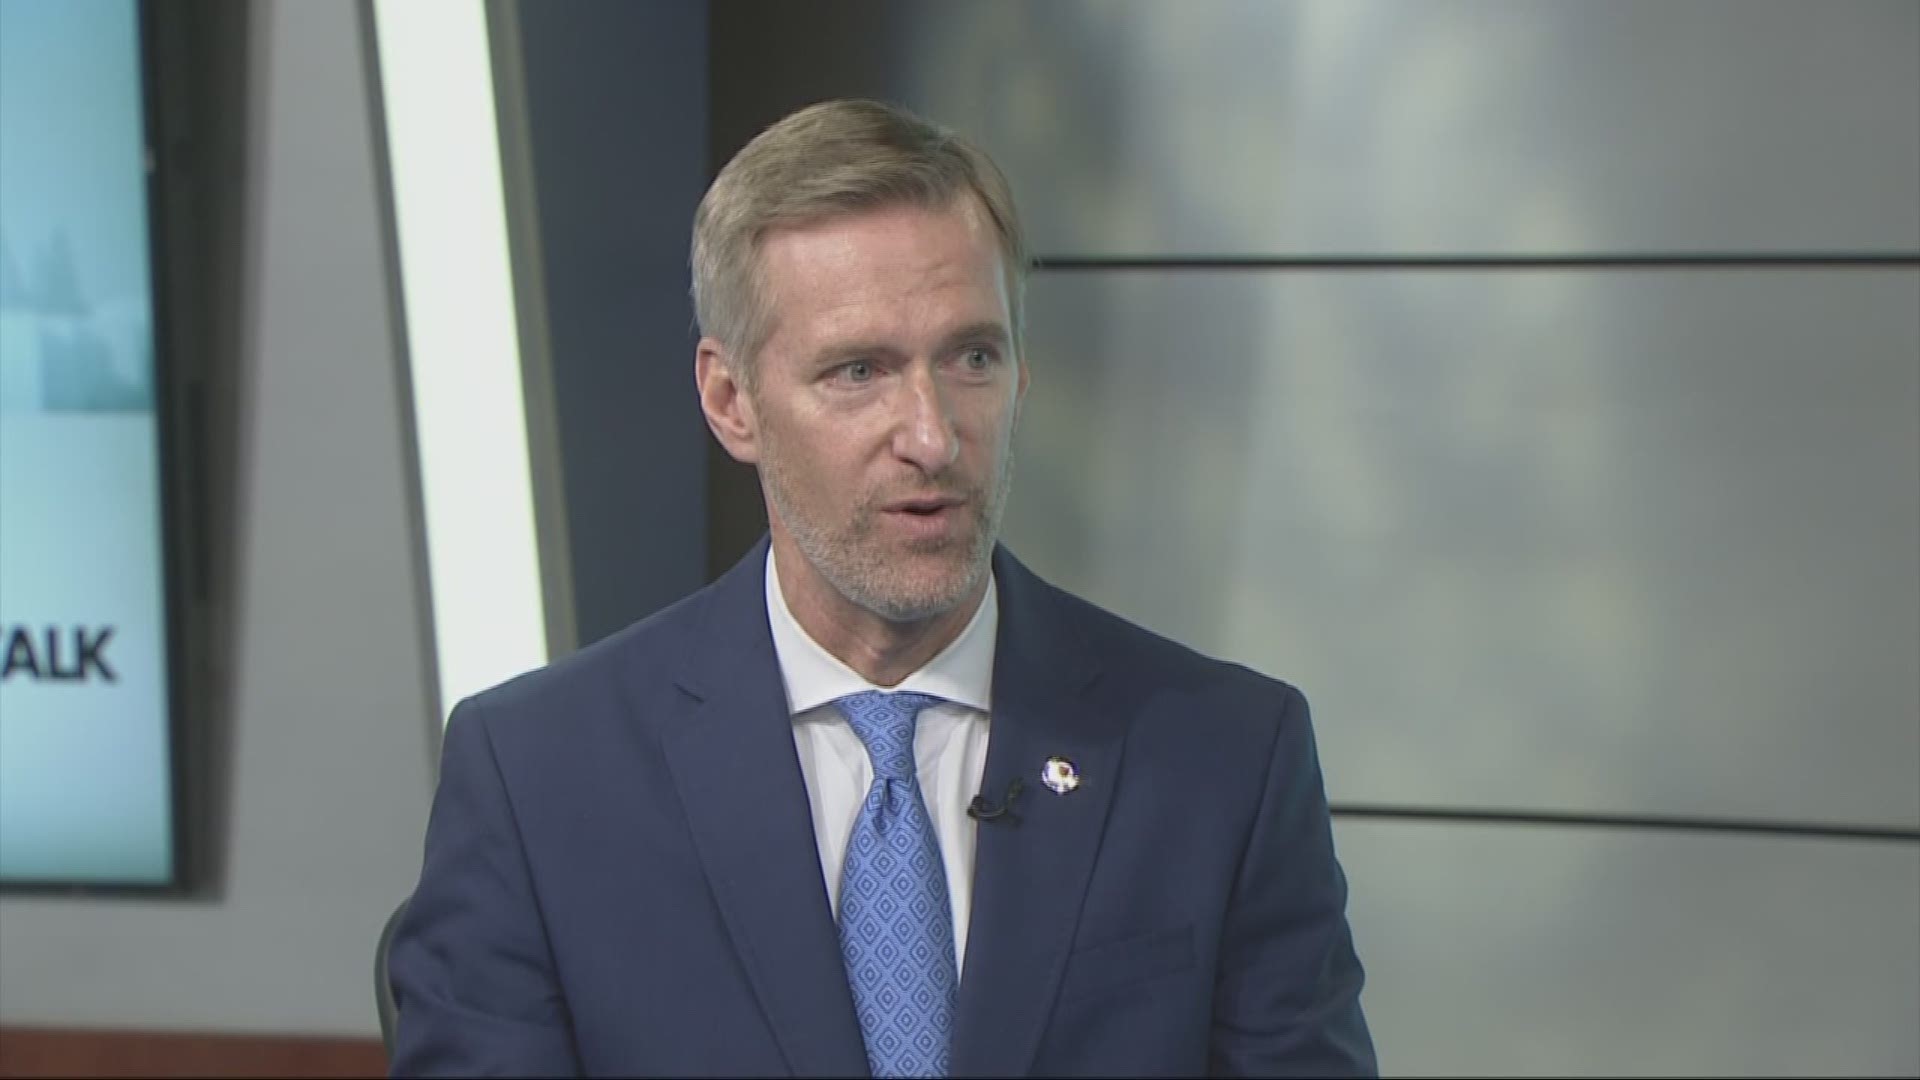 Mayor Wheeler discusses oil trains, homelessness, police reform, parks and why he'll likely run for re-election.